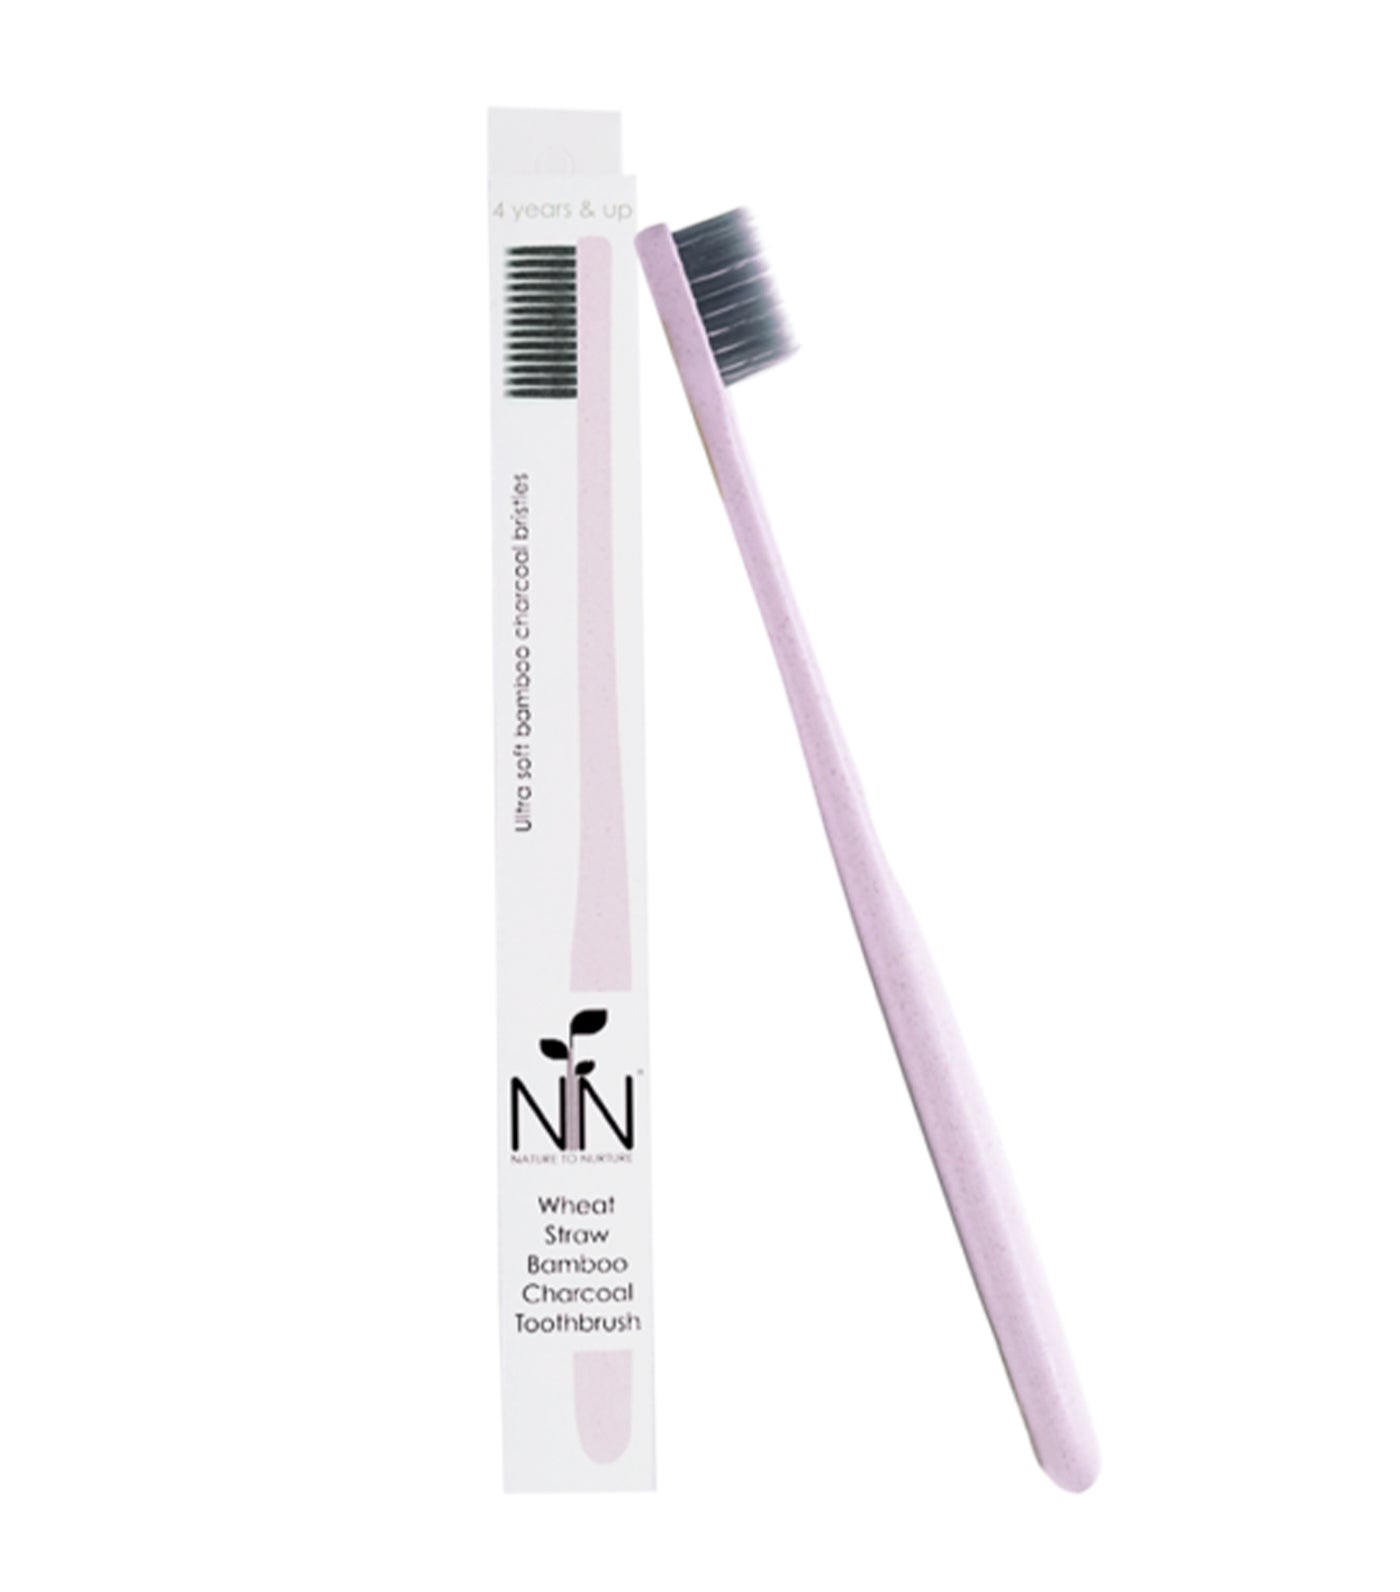 nature to nurture wheat straw bamboo charcoal toothbrush 4 years and up pink